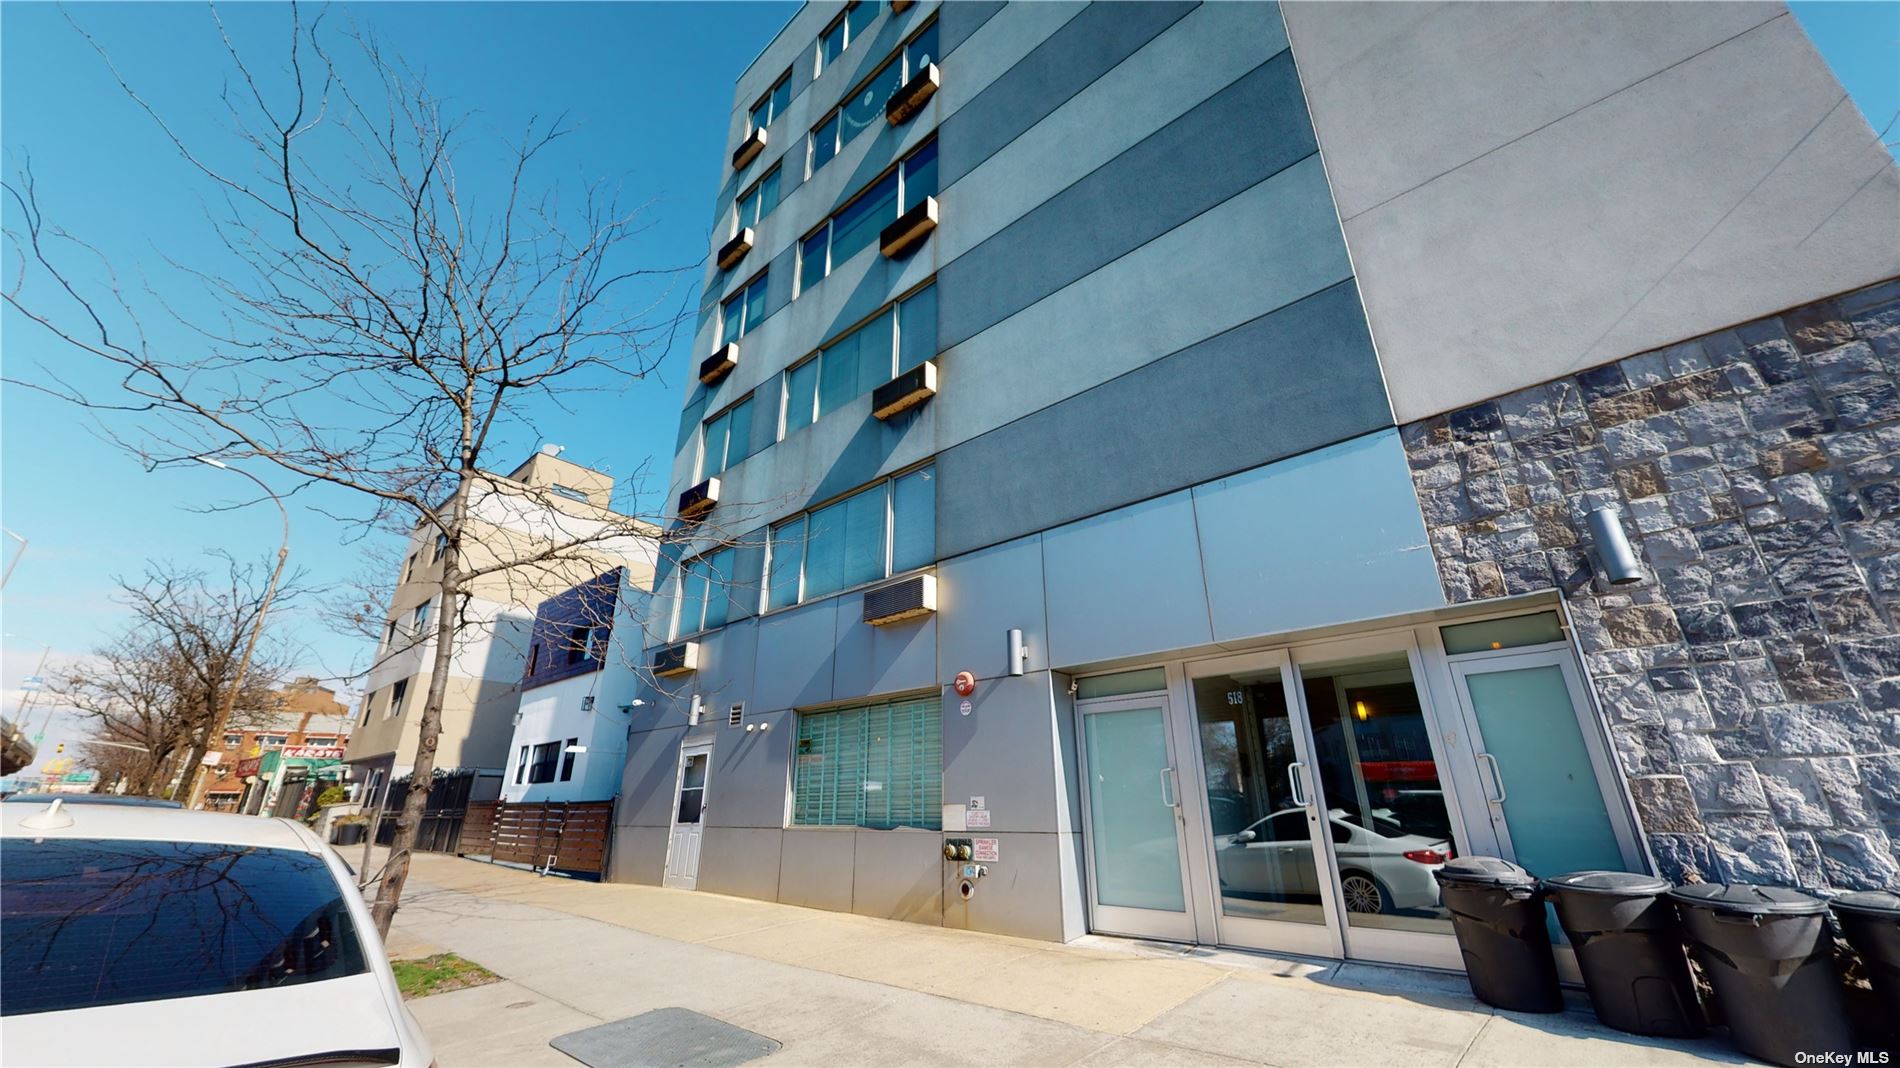 10 Family Building in Greenpoint - Meeker  Brooklyn, NY 11222